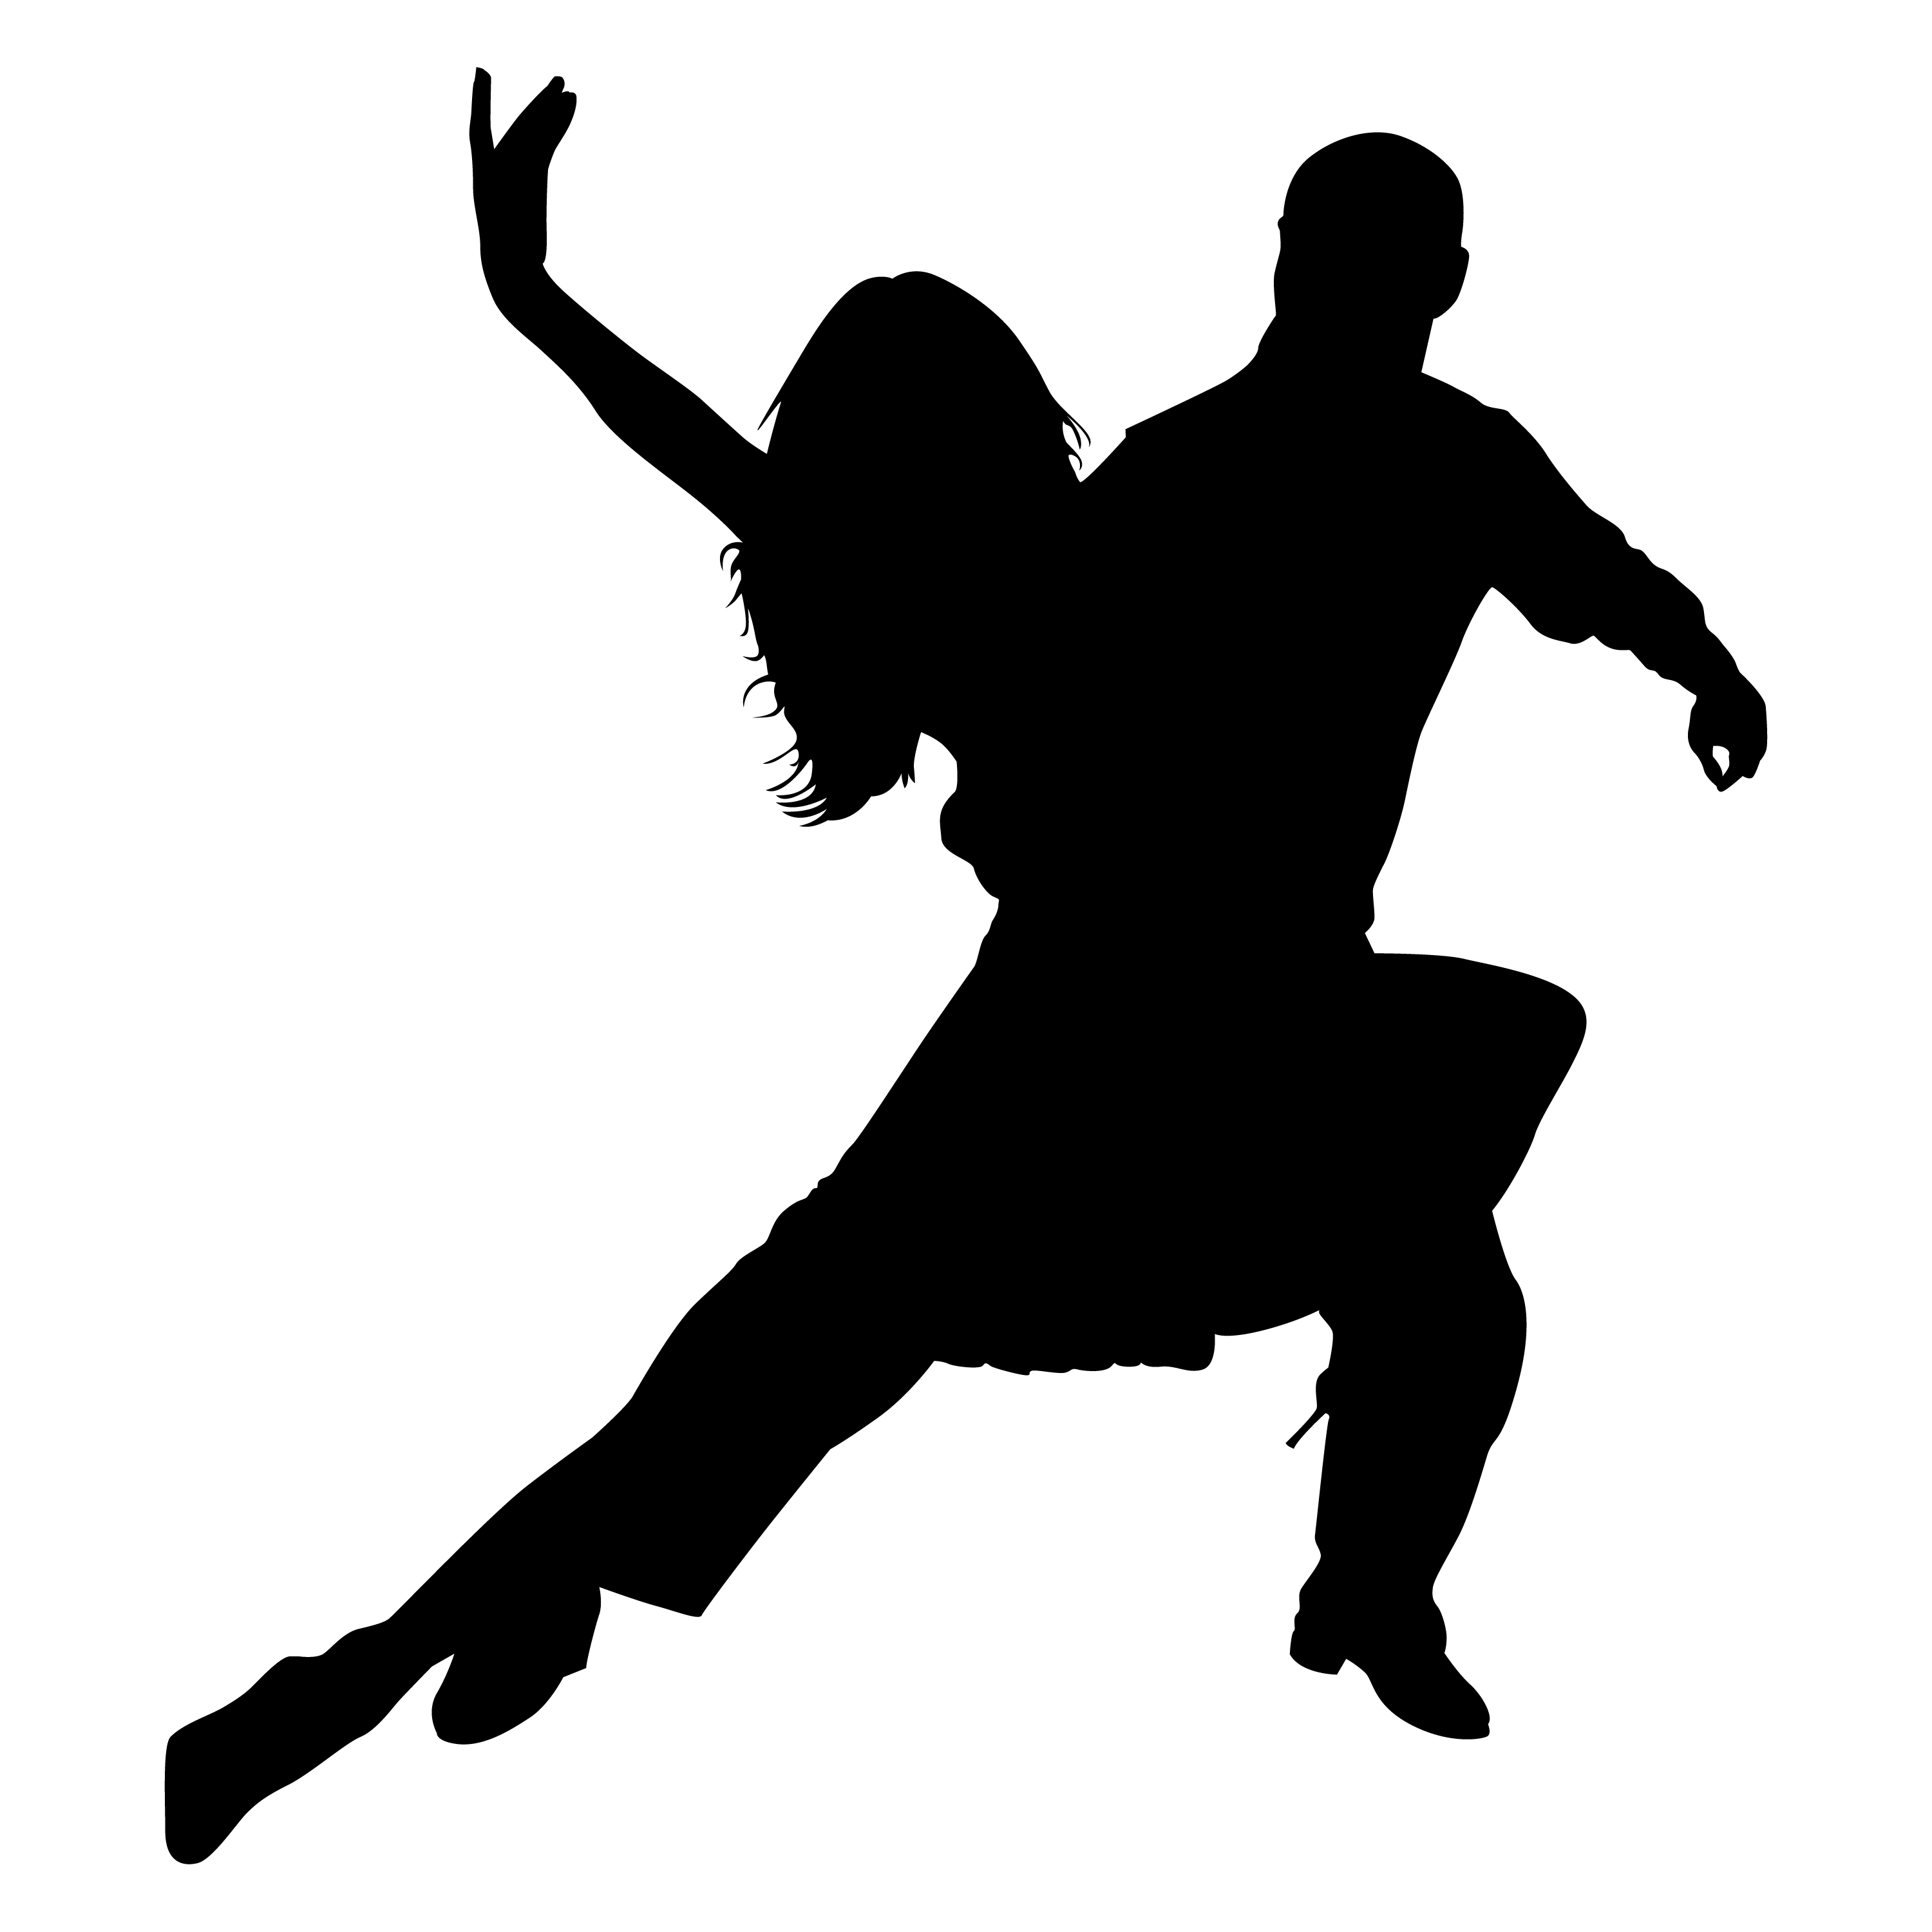 Contemporary Dancer Silhouette   Clipart Panda   Free Clipart Images